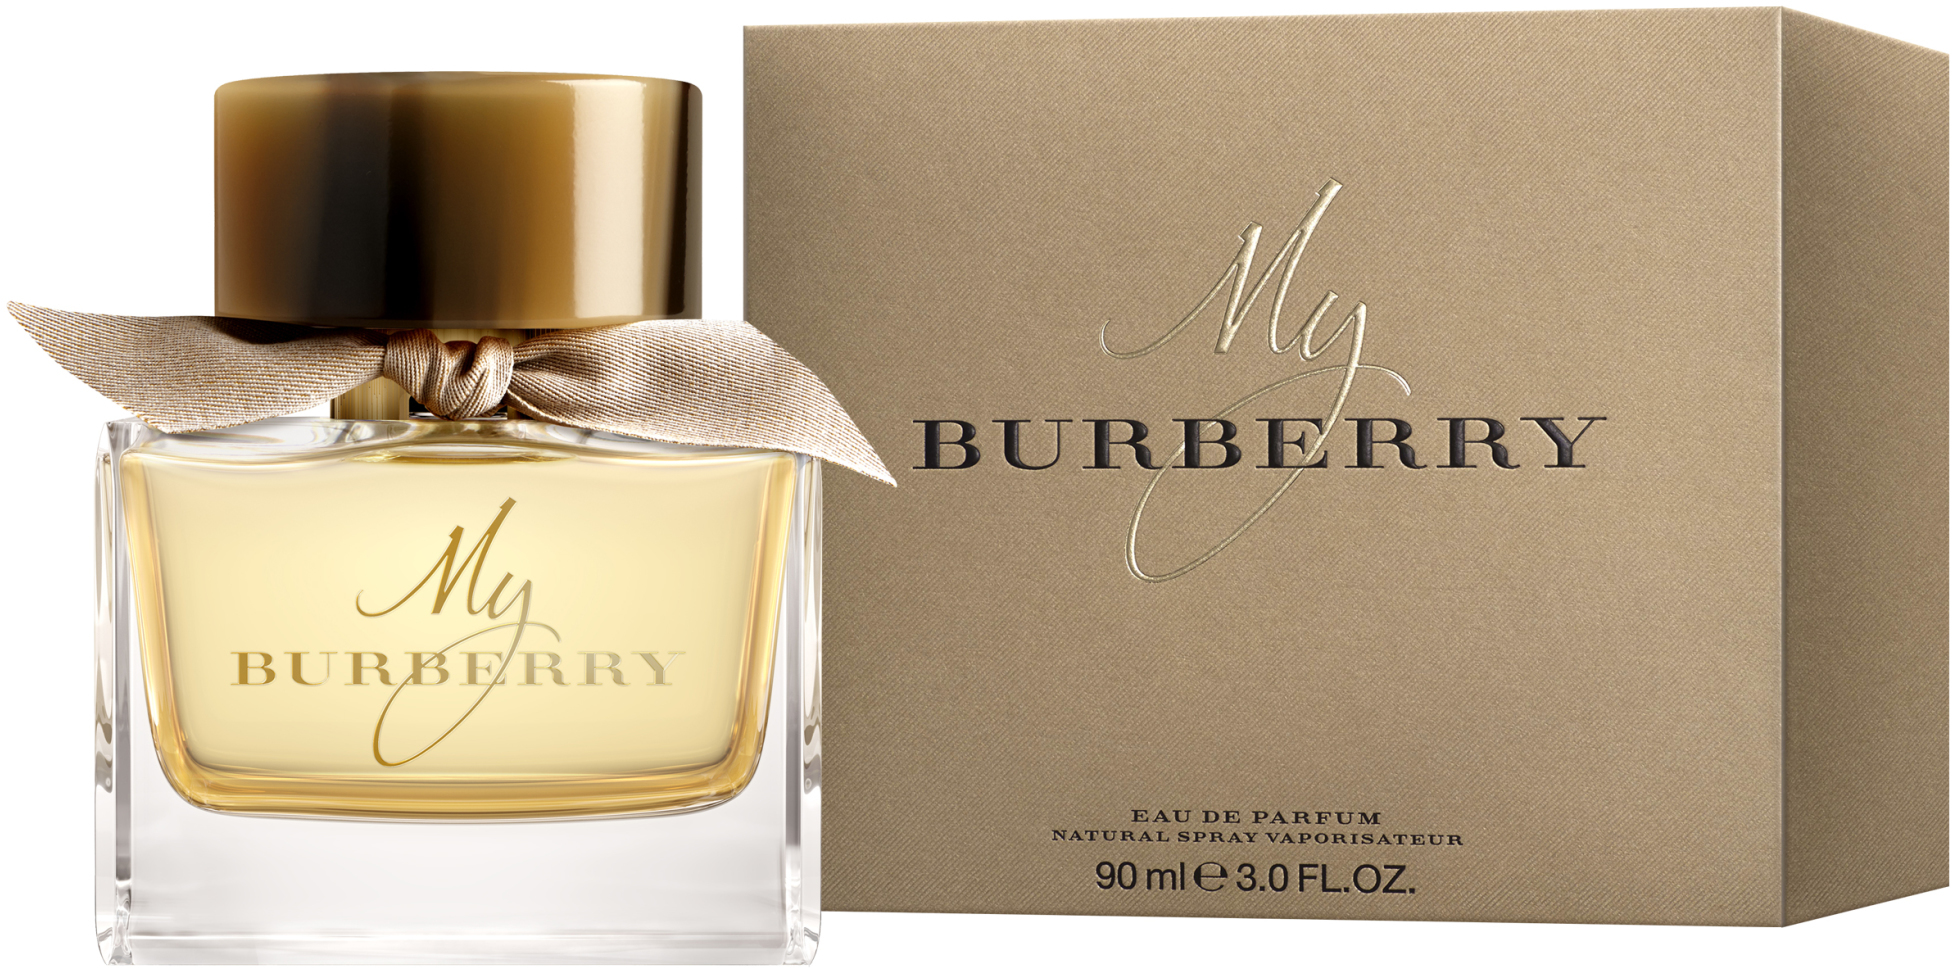 My Burberry EdP in duty-free at airport